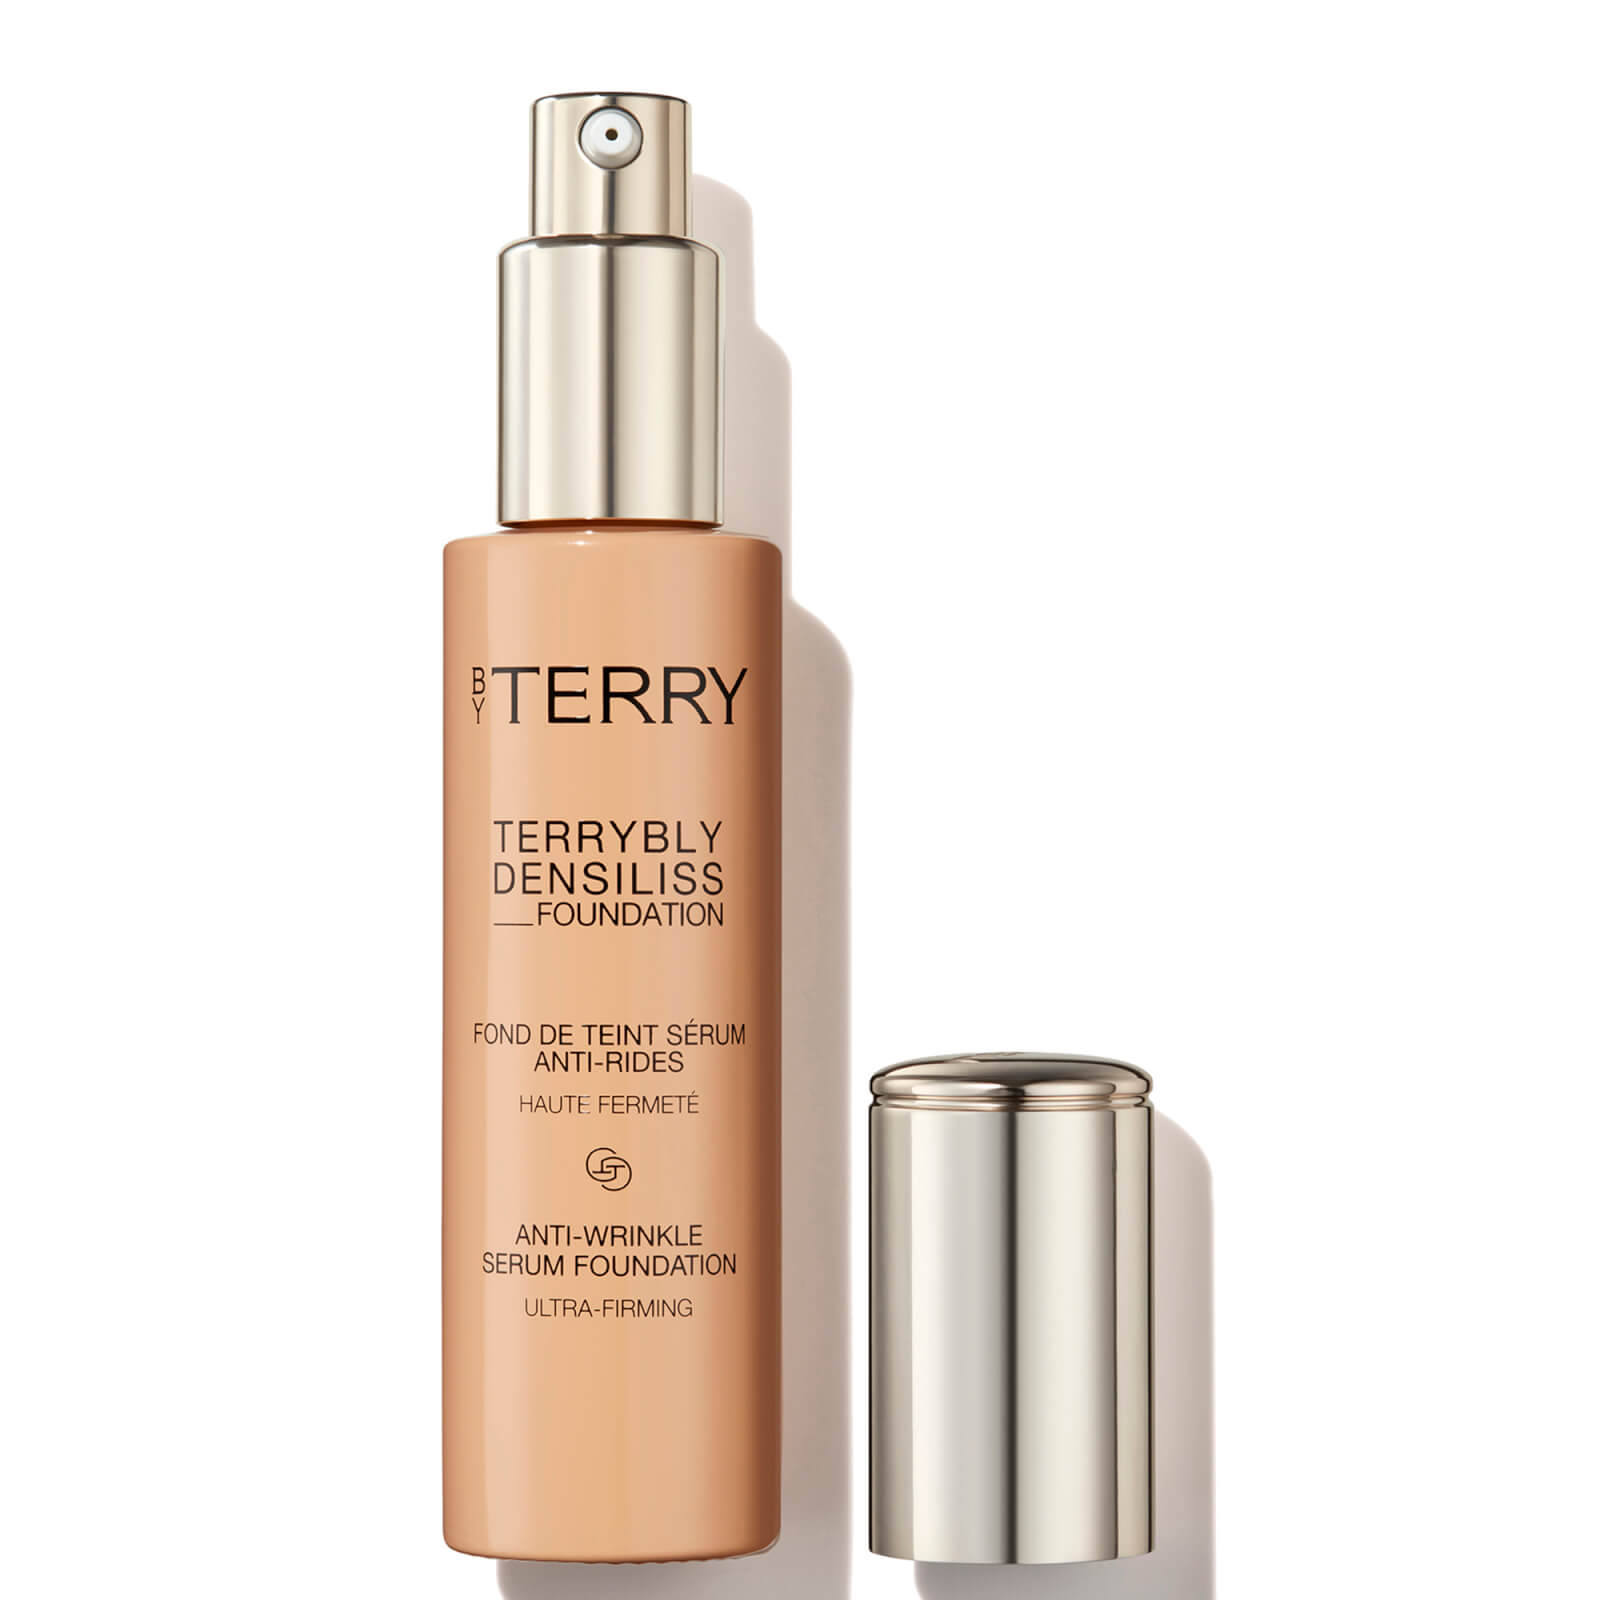 By Terry Terrybly Densiliss Foundation 30ml (Various Shades) - 4. Natural Beige